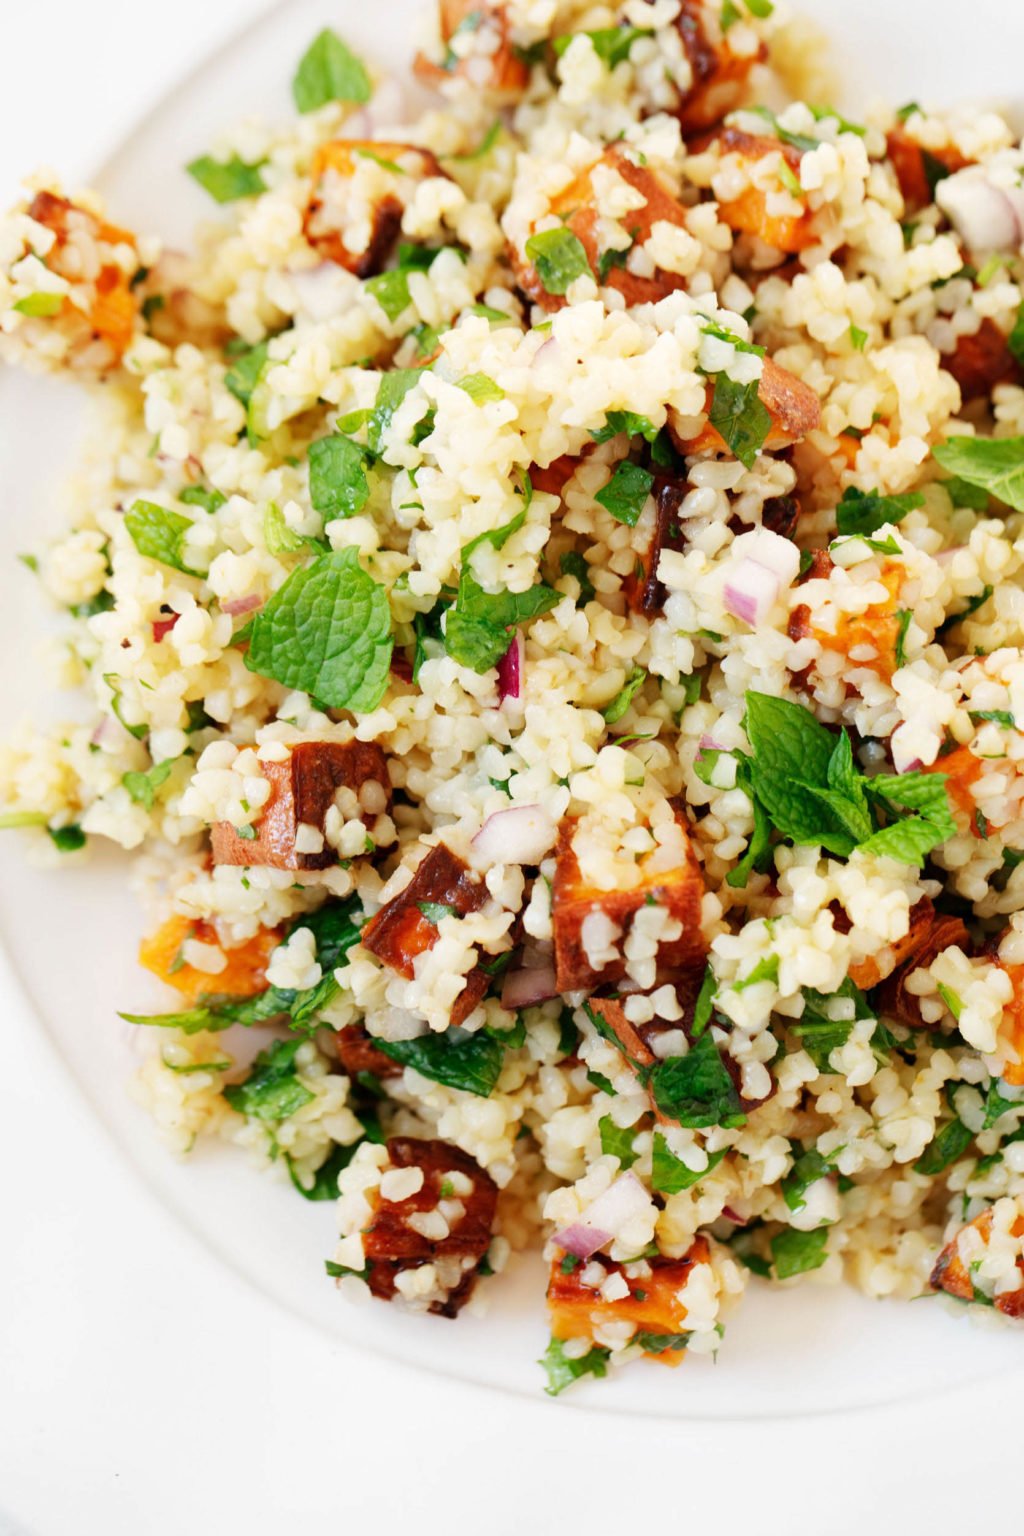 A close up image of a bulgur sweet potato grain salad, which is topped with chopped fresh mint.